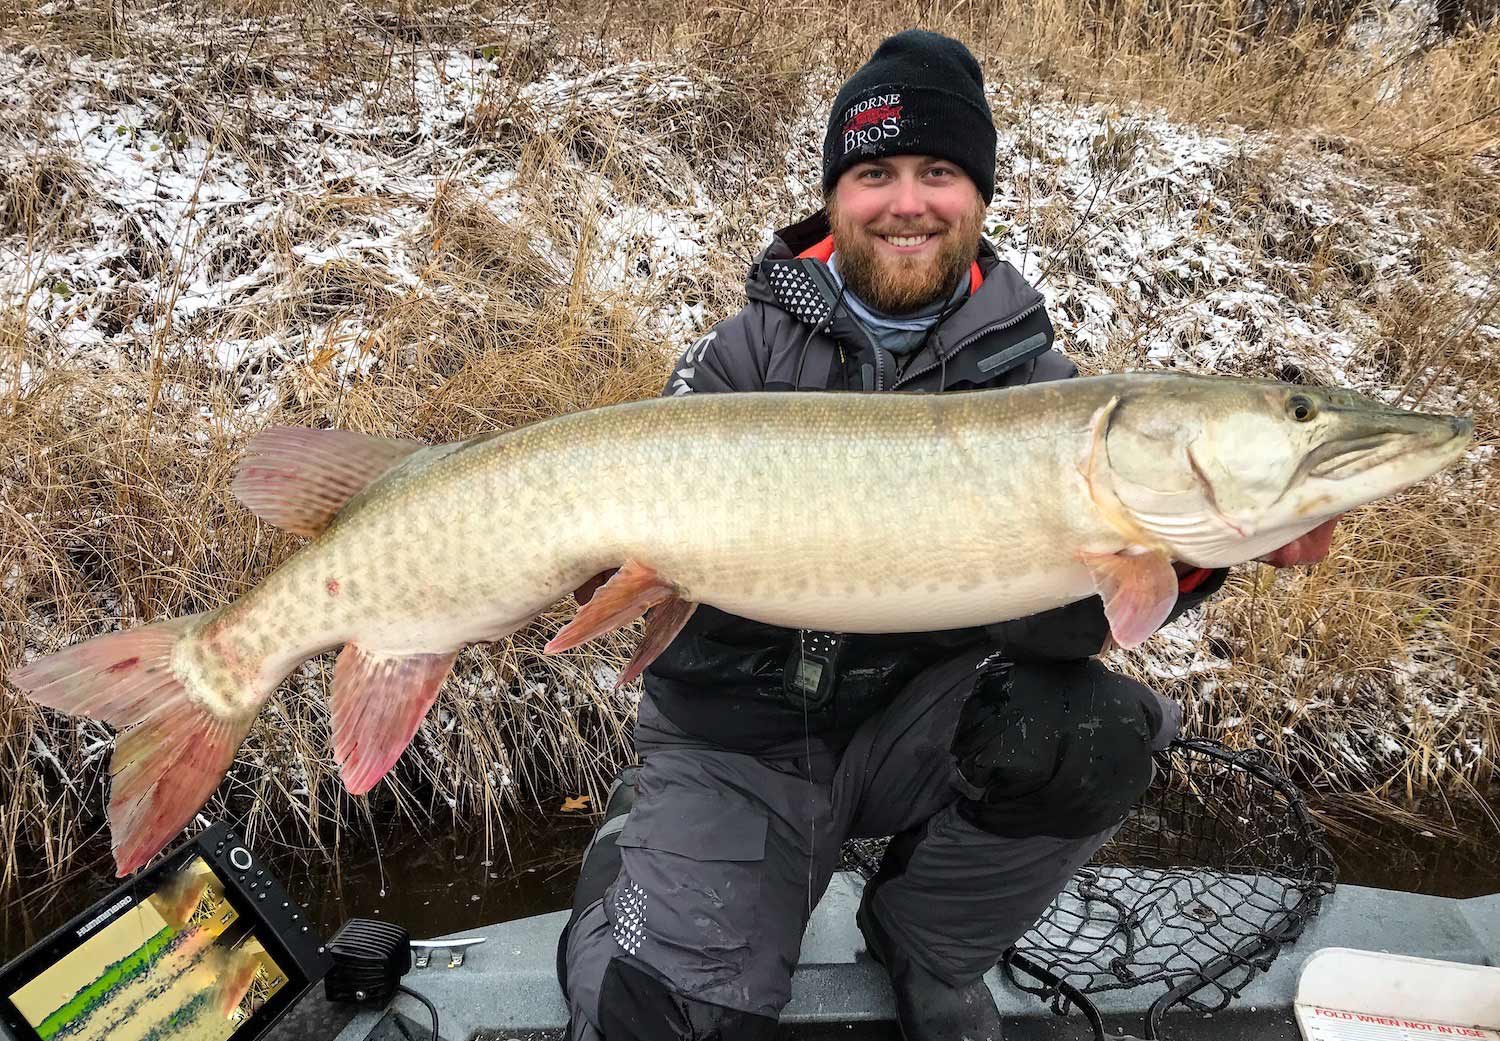 Muskie guide Luke Swanson holds up a fat muskie caught during Minnesota’s shoulder season.